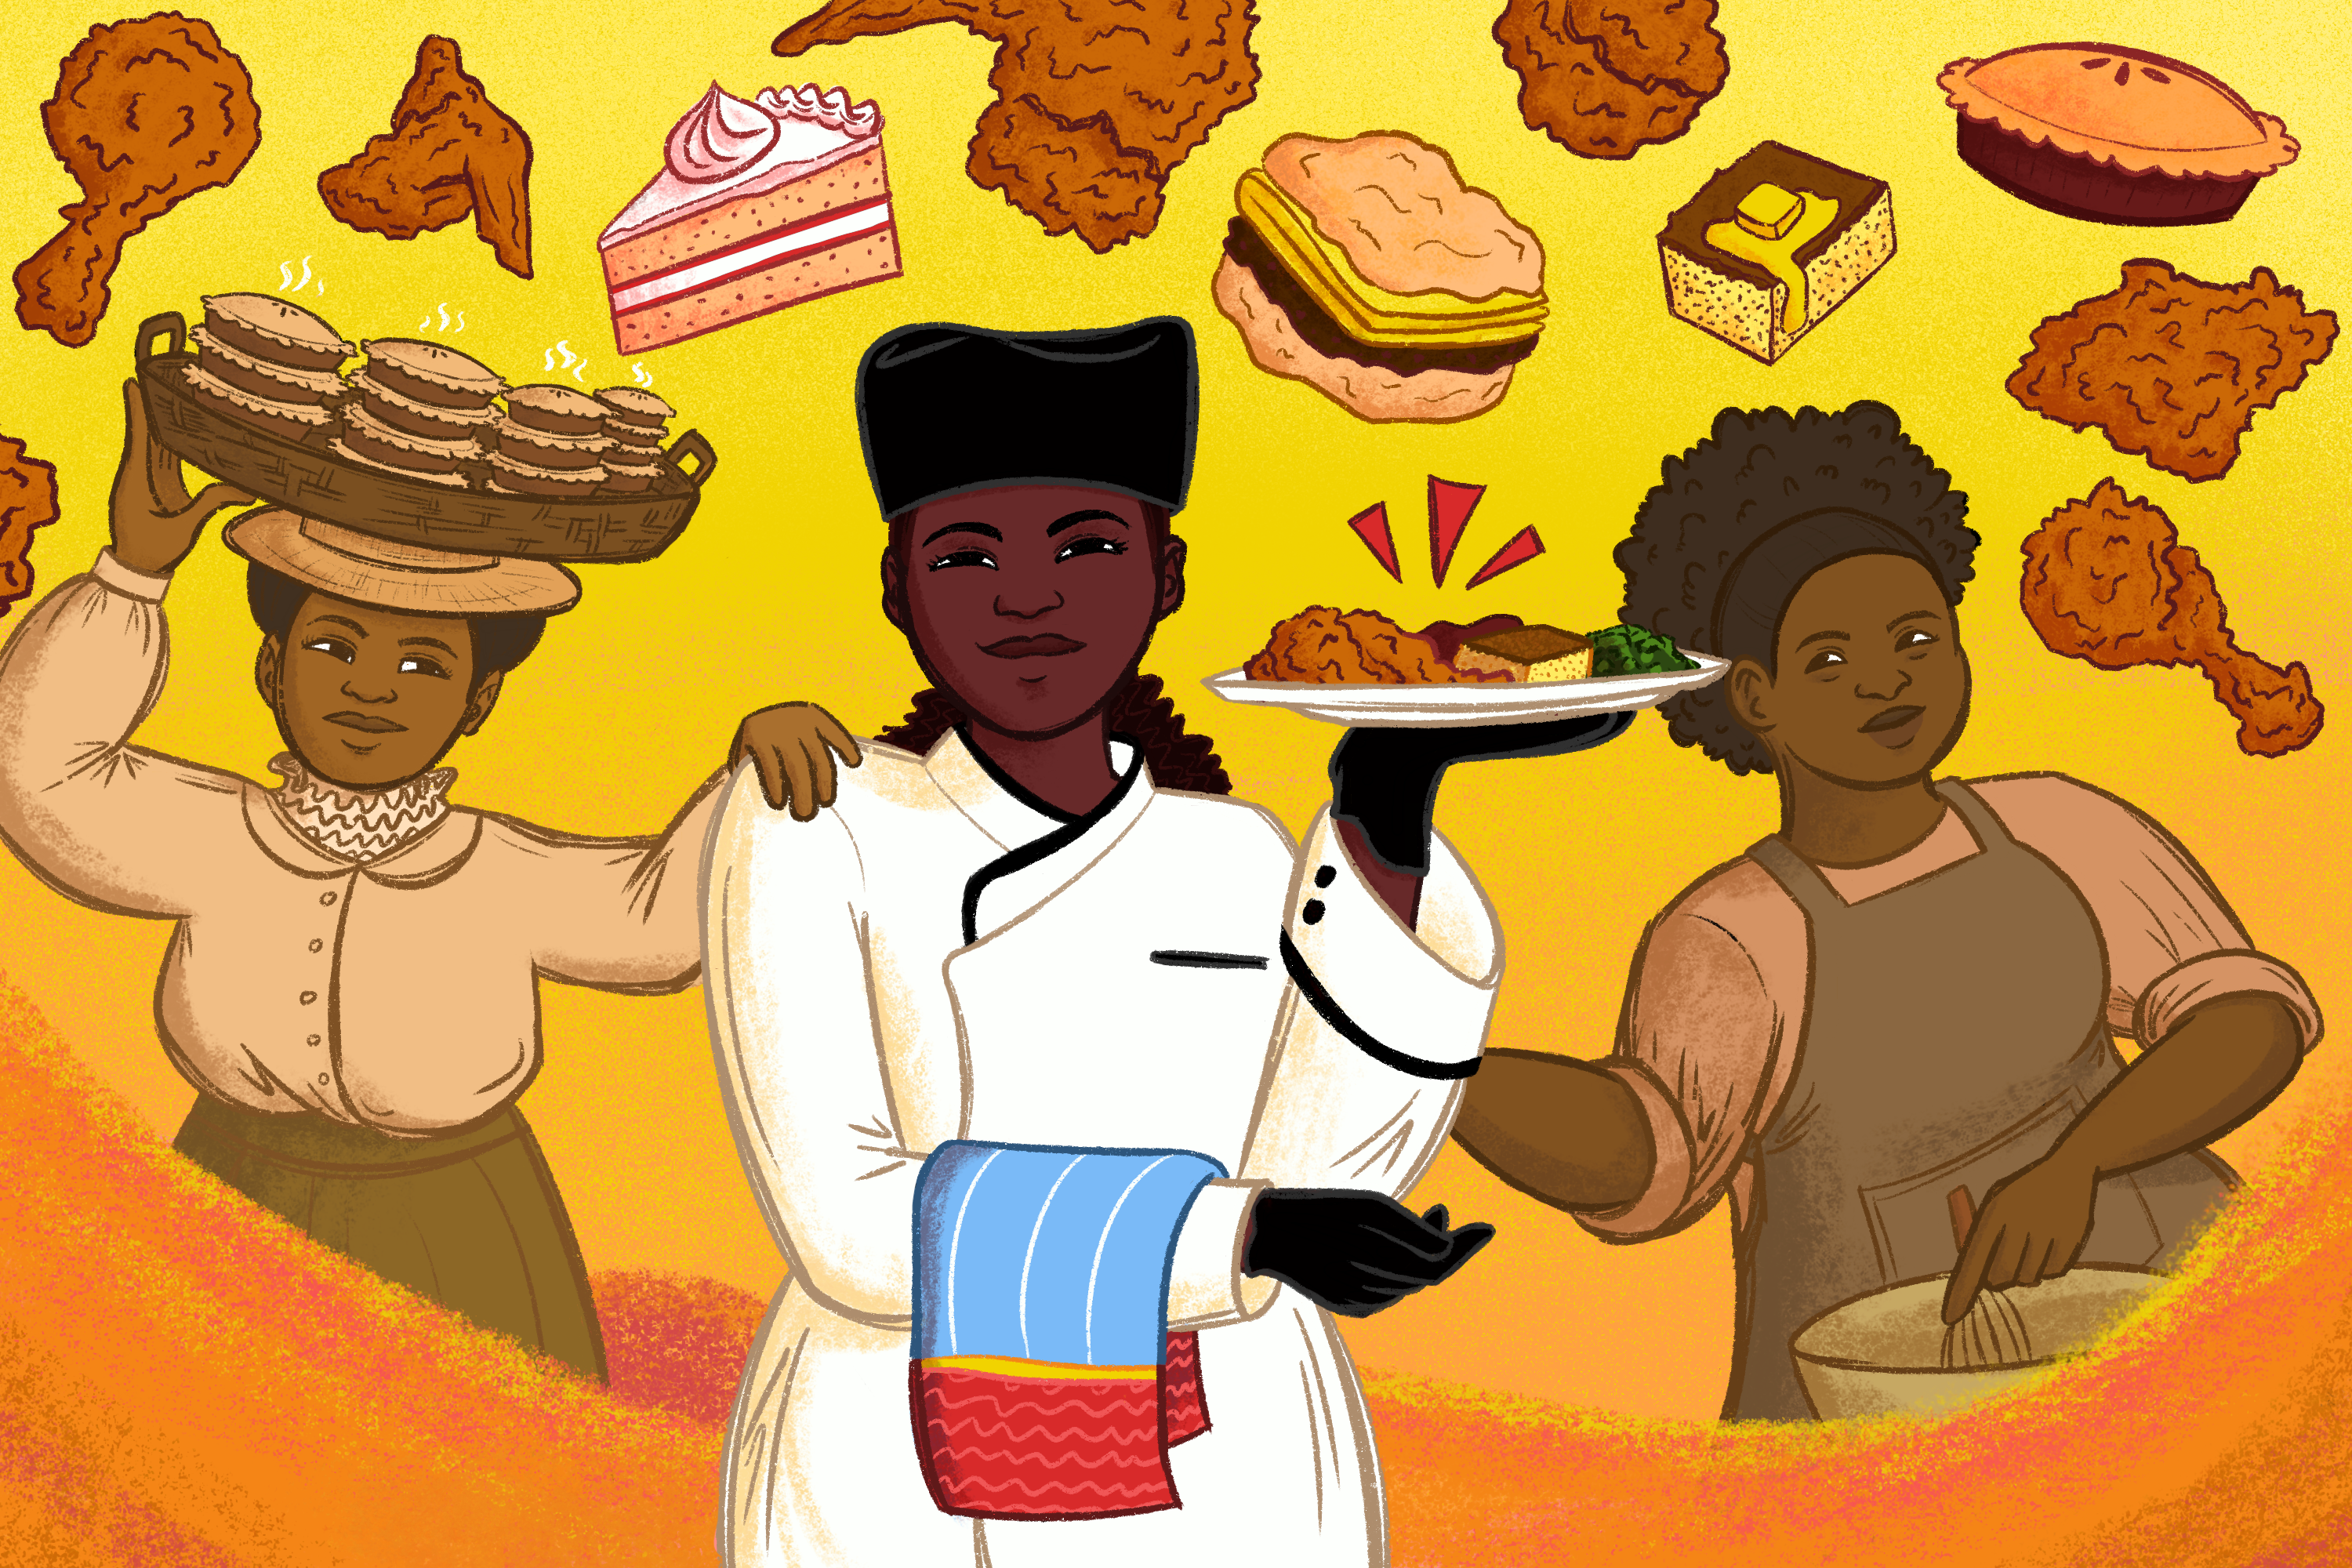 A Black woman chef holds a plate of fried chicken and other Southern staples as two Black women cooks, her predecessors, support her on either side. Above them, more chicken, a biscuit sandwich, and slices of cake and cornbread float.